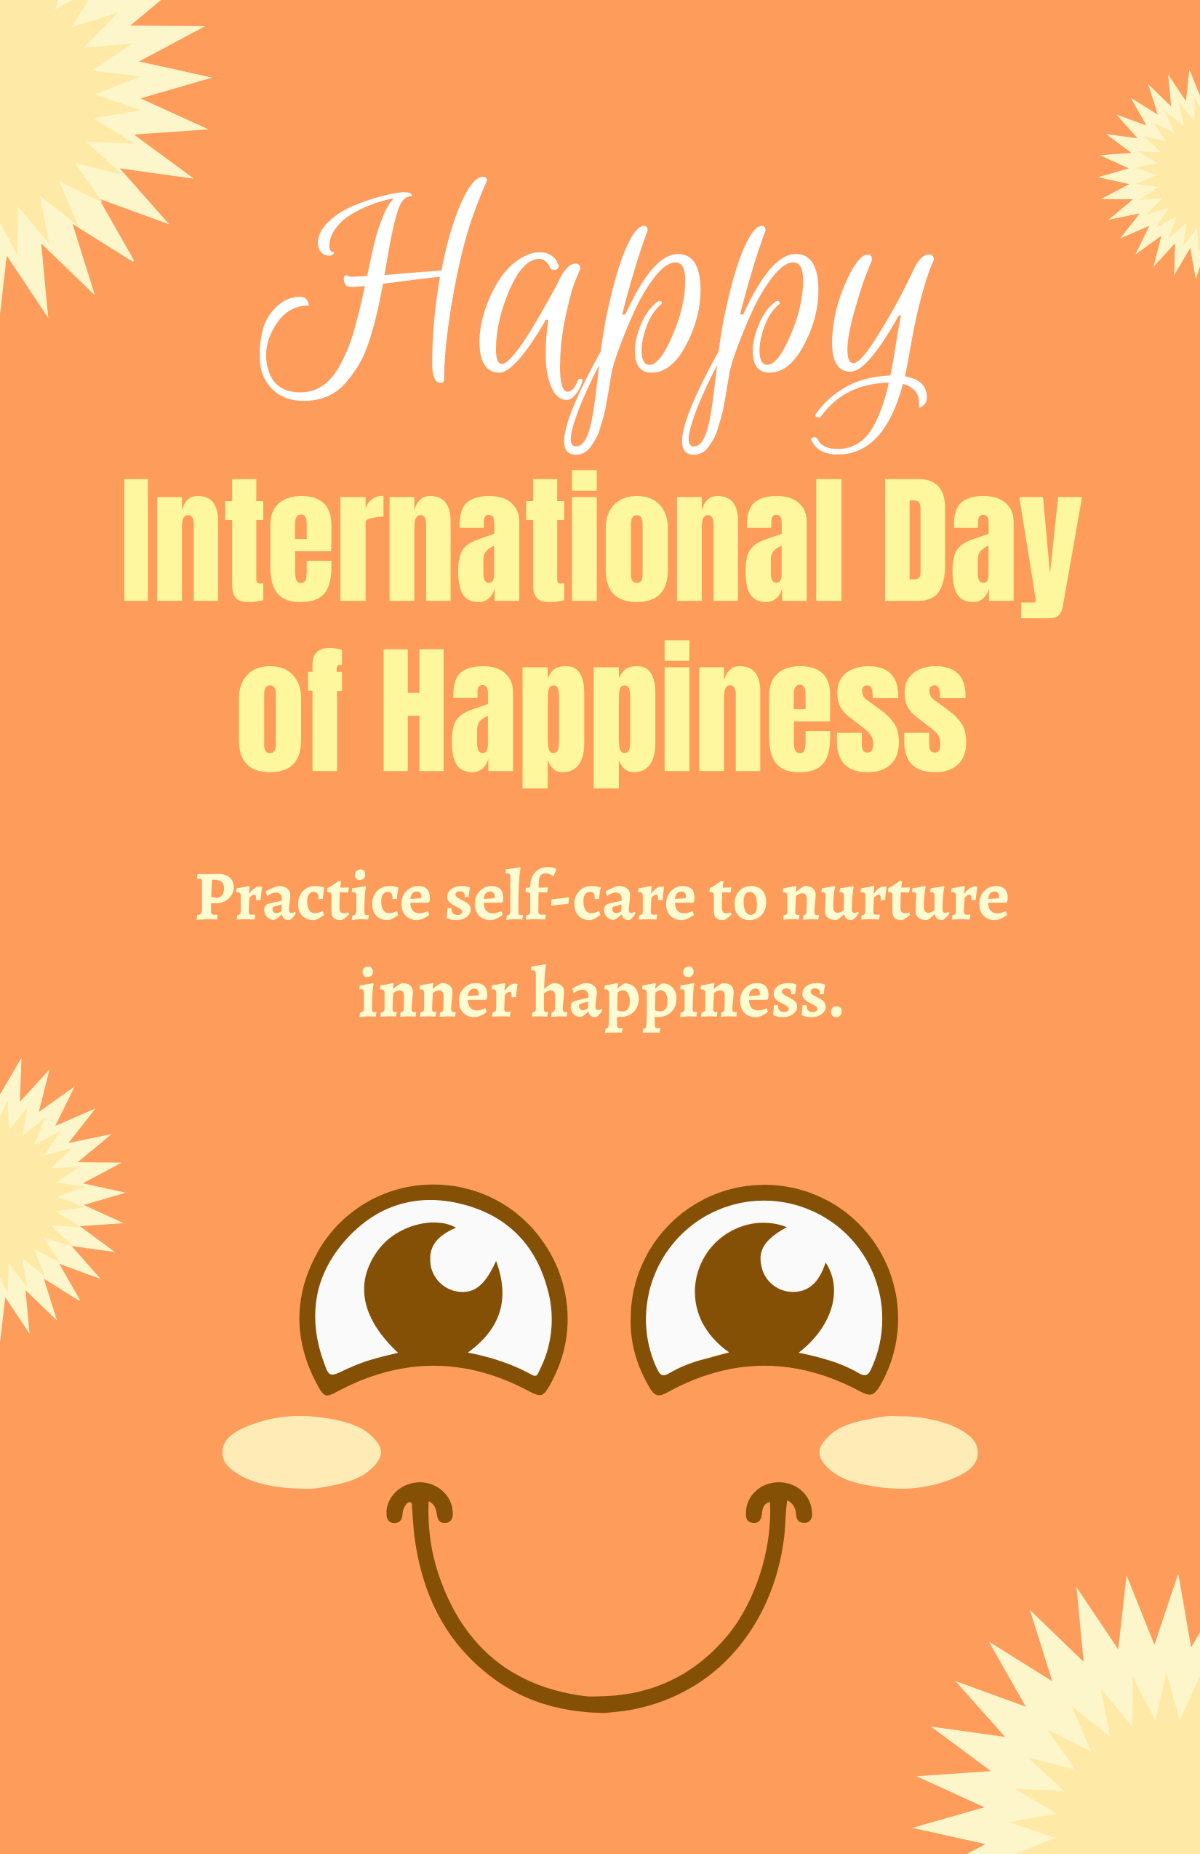 International Day of Happiness Poster